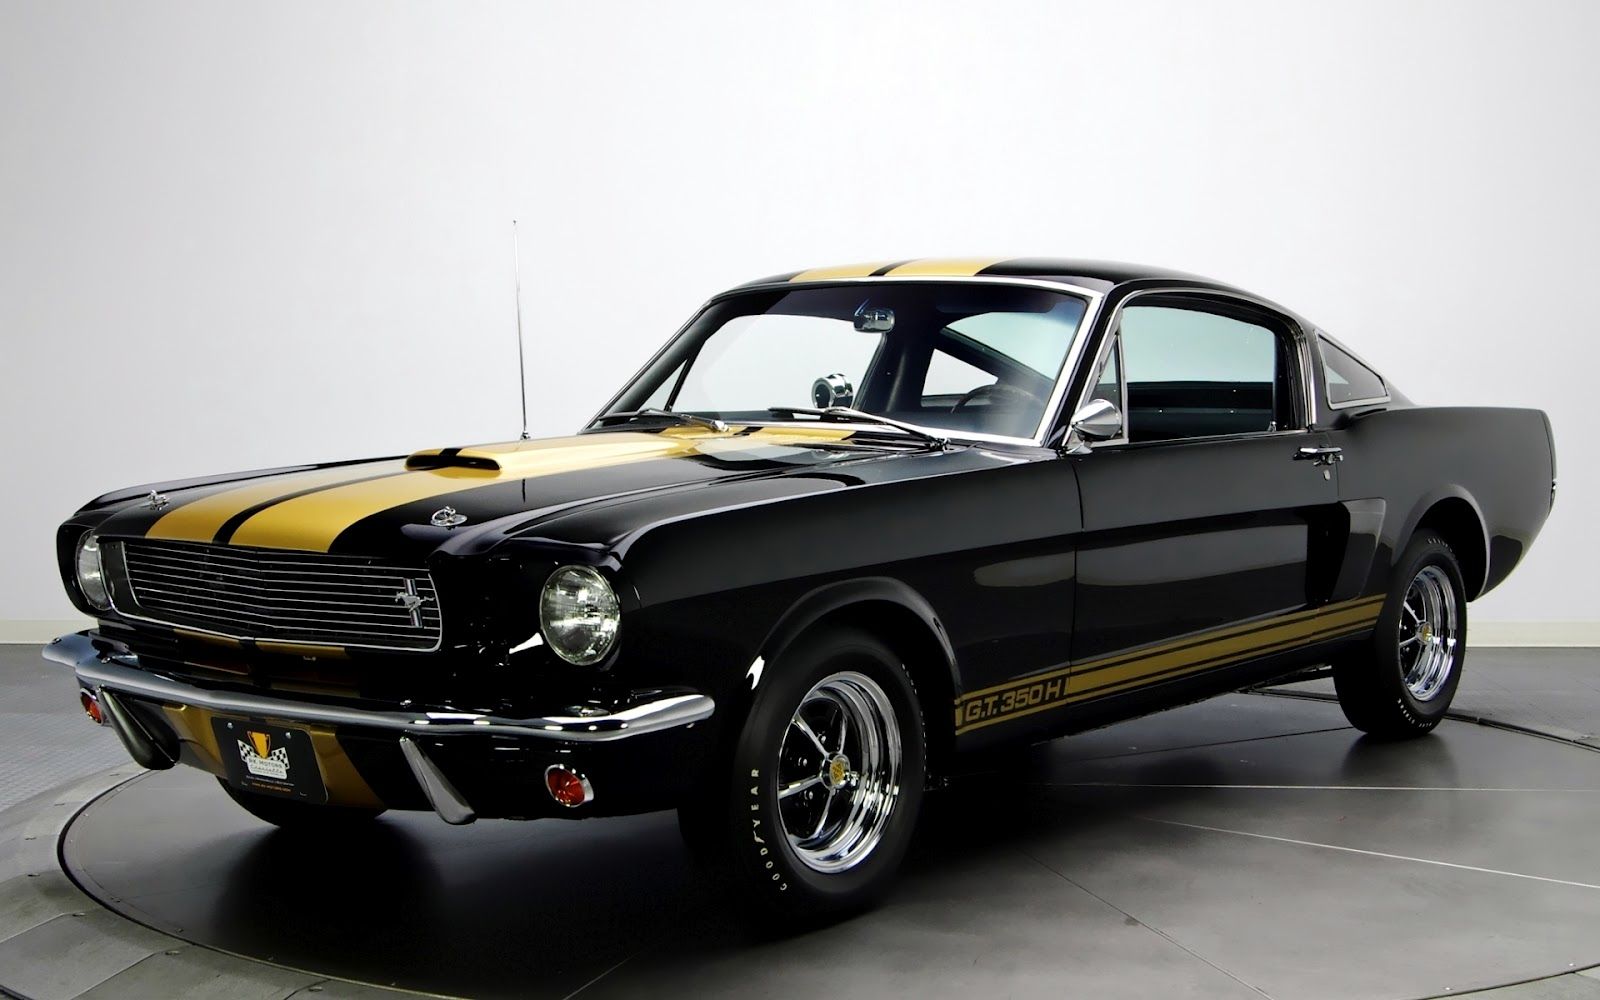 Ford Mustang Gt 350 H wallpaper, Vehicles, HQ 1966 Ford